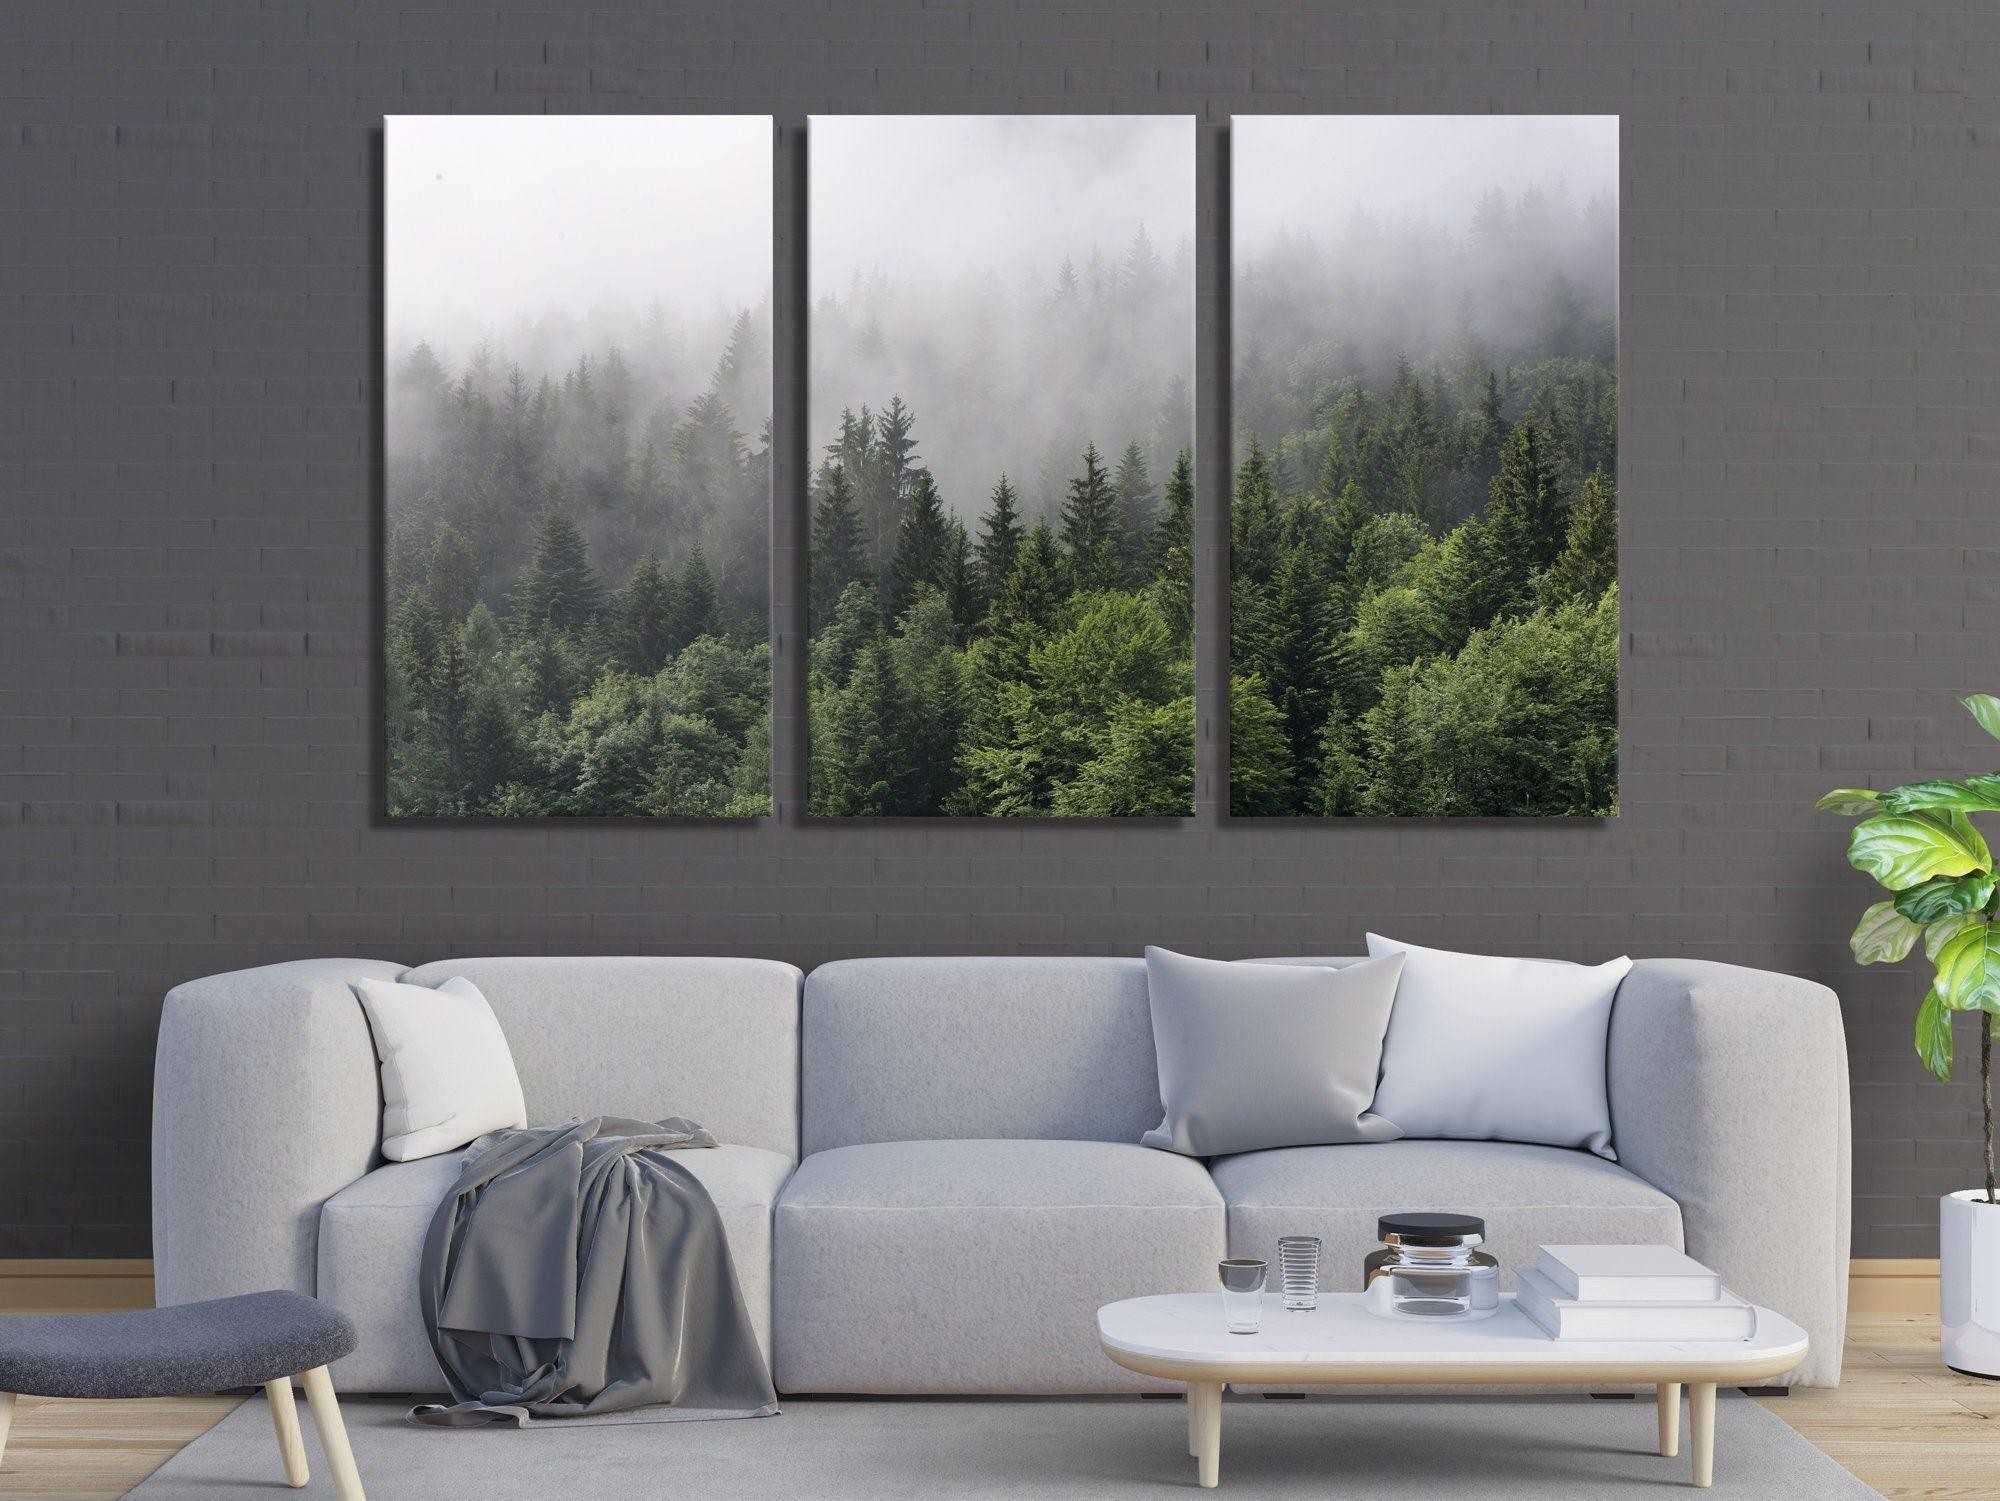 Set of 3 Foggy Forest Prints |  Forest canvas wall art, Foggy trees, Room decor, Office wall decor, wall hanging, Fine art, Modern Art Gift